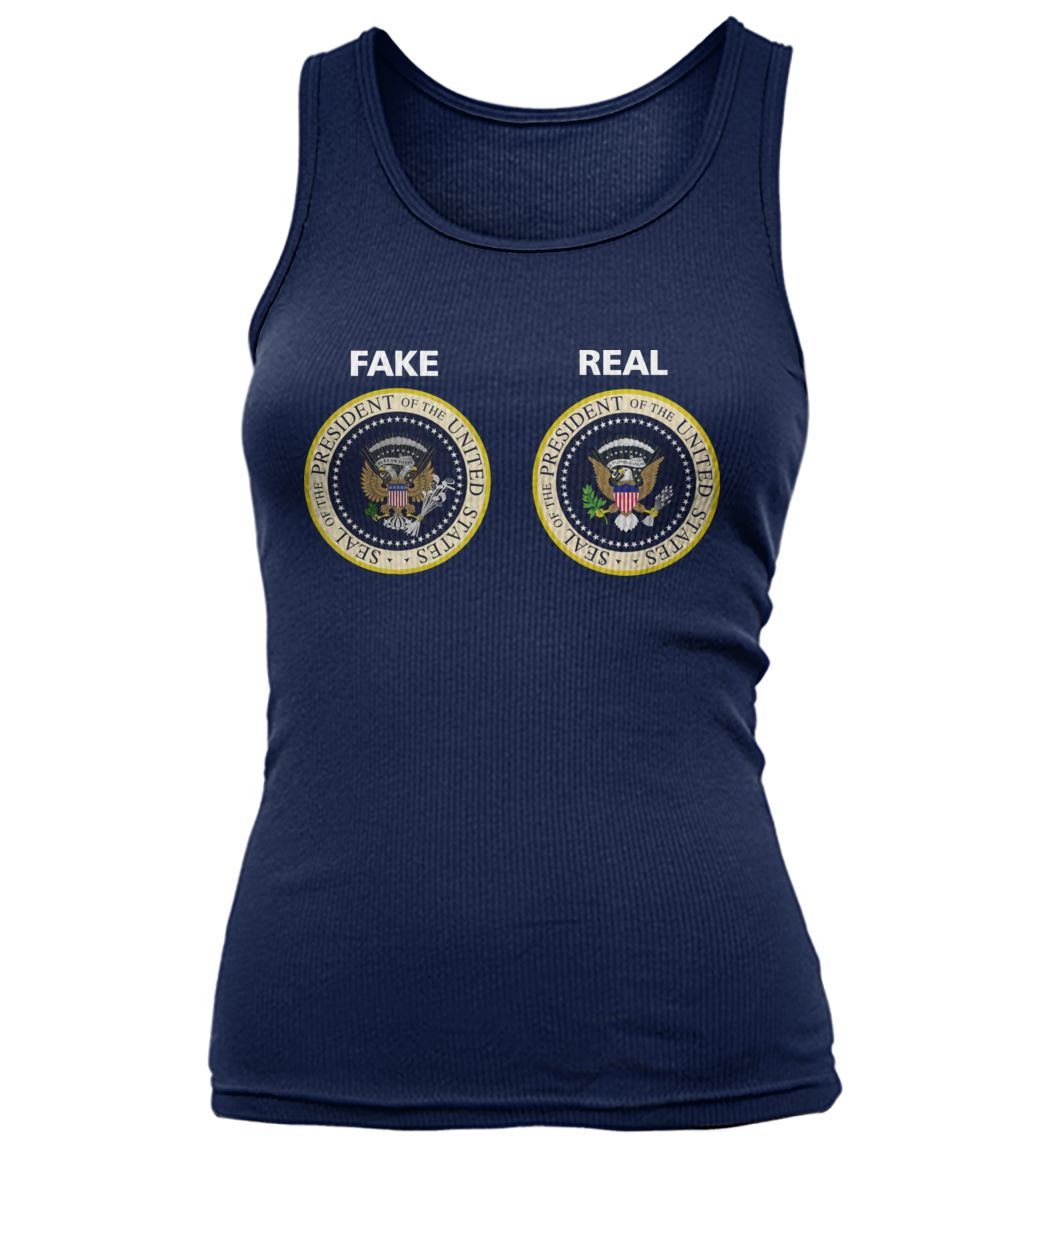 Real and fake presidential seal women's tank top